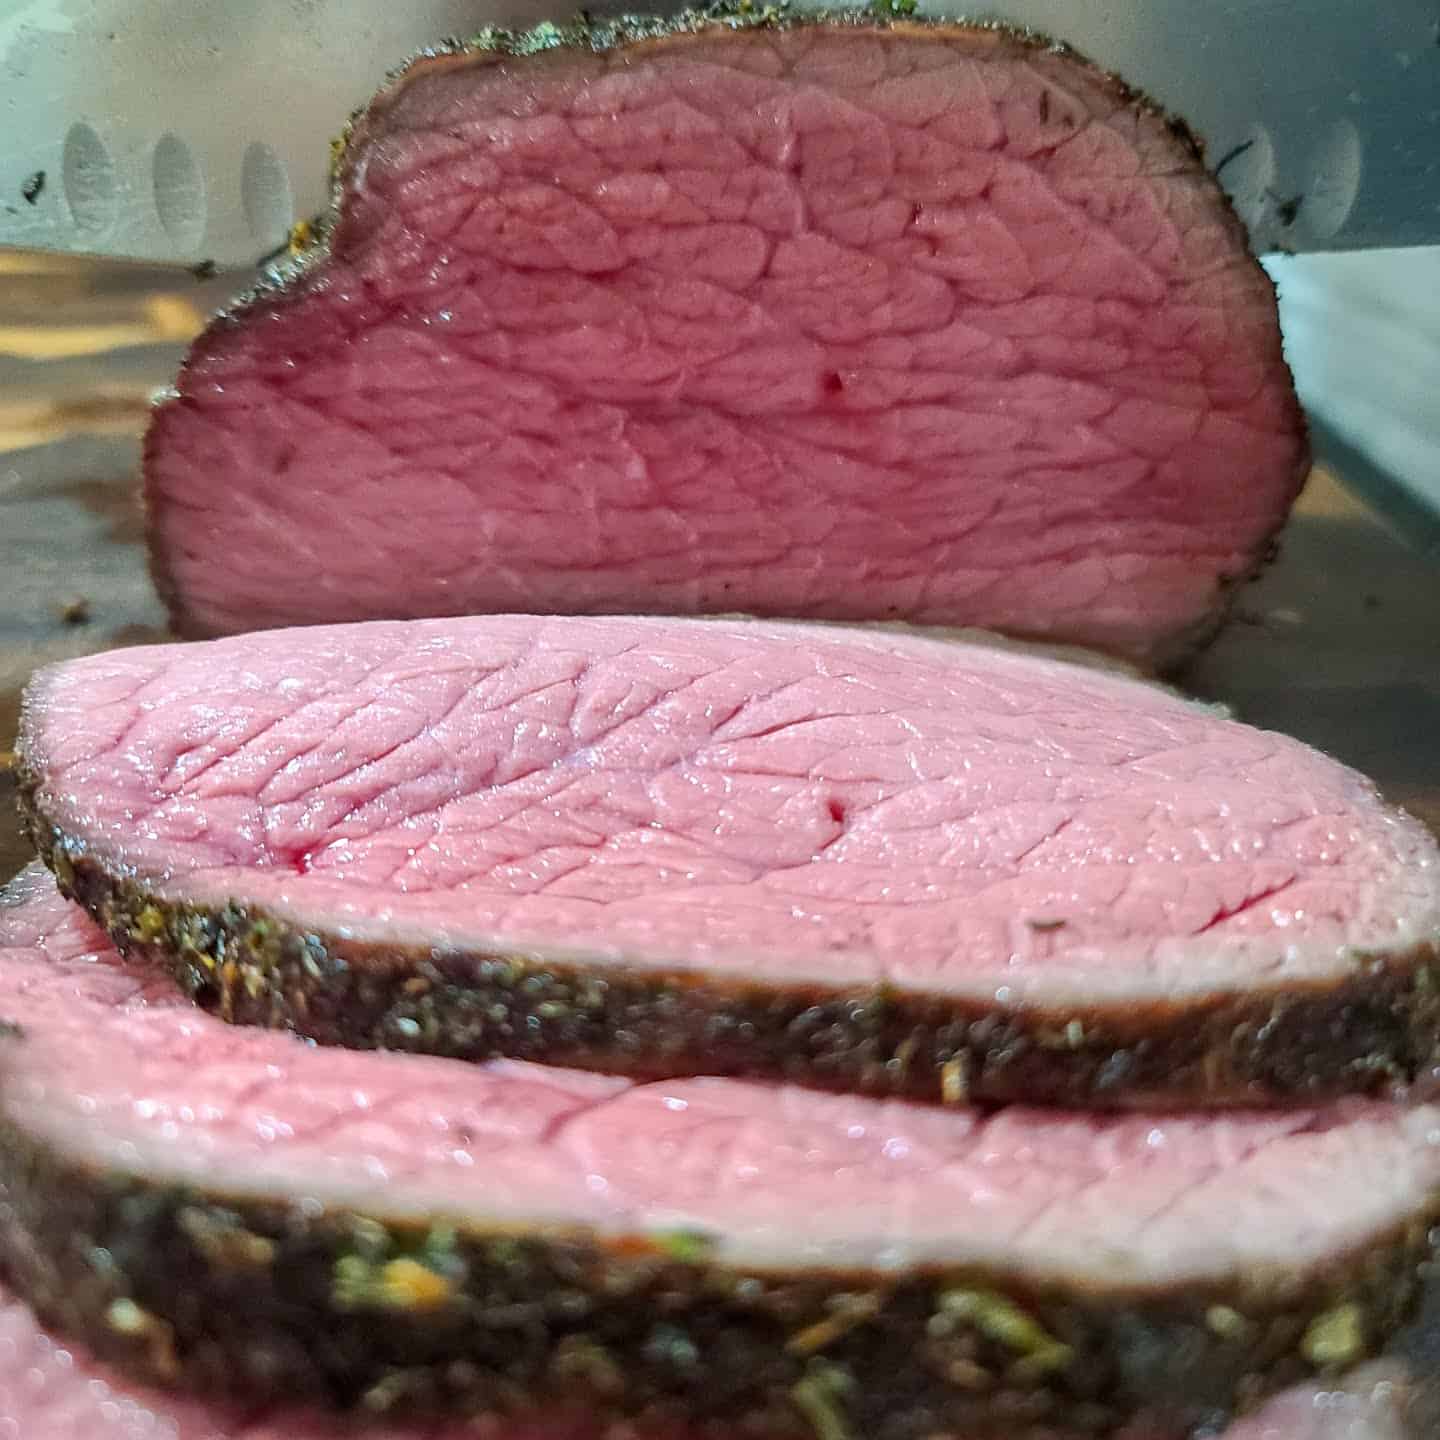 Can you believe this is a bottom round roast?